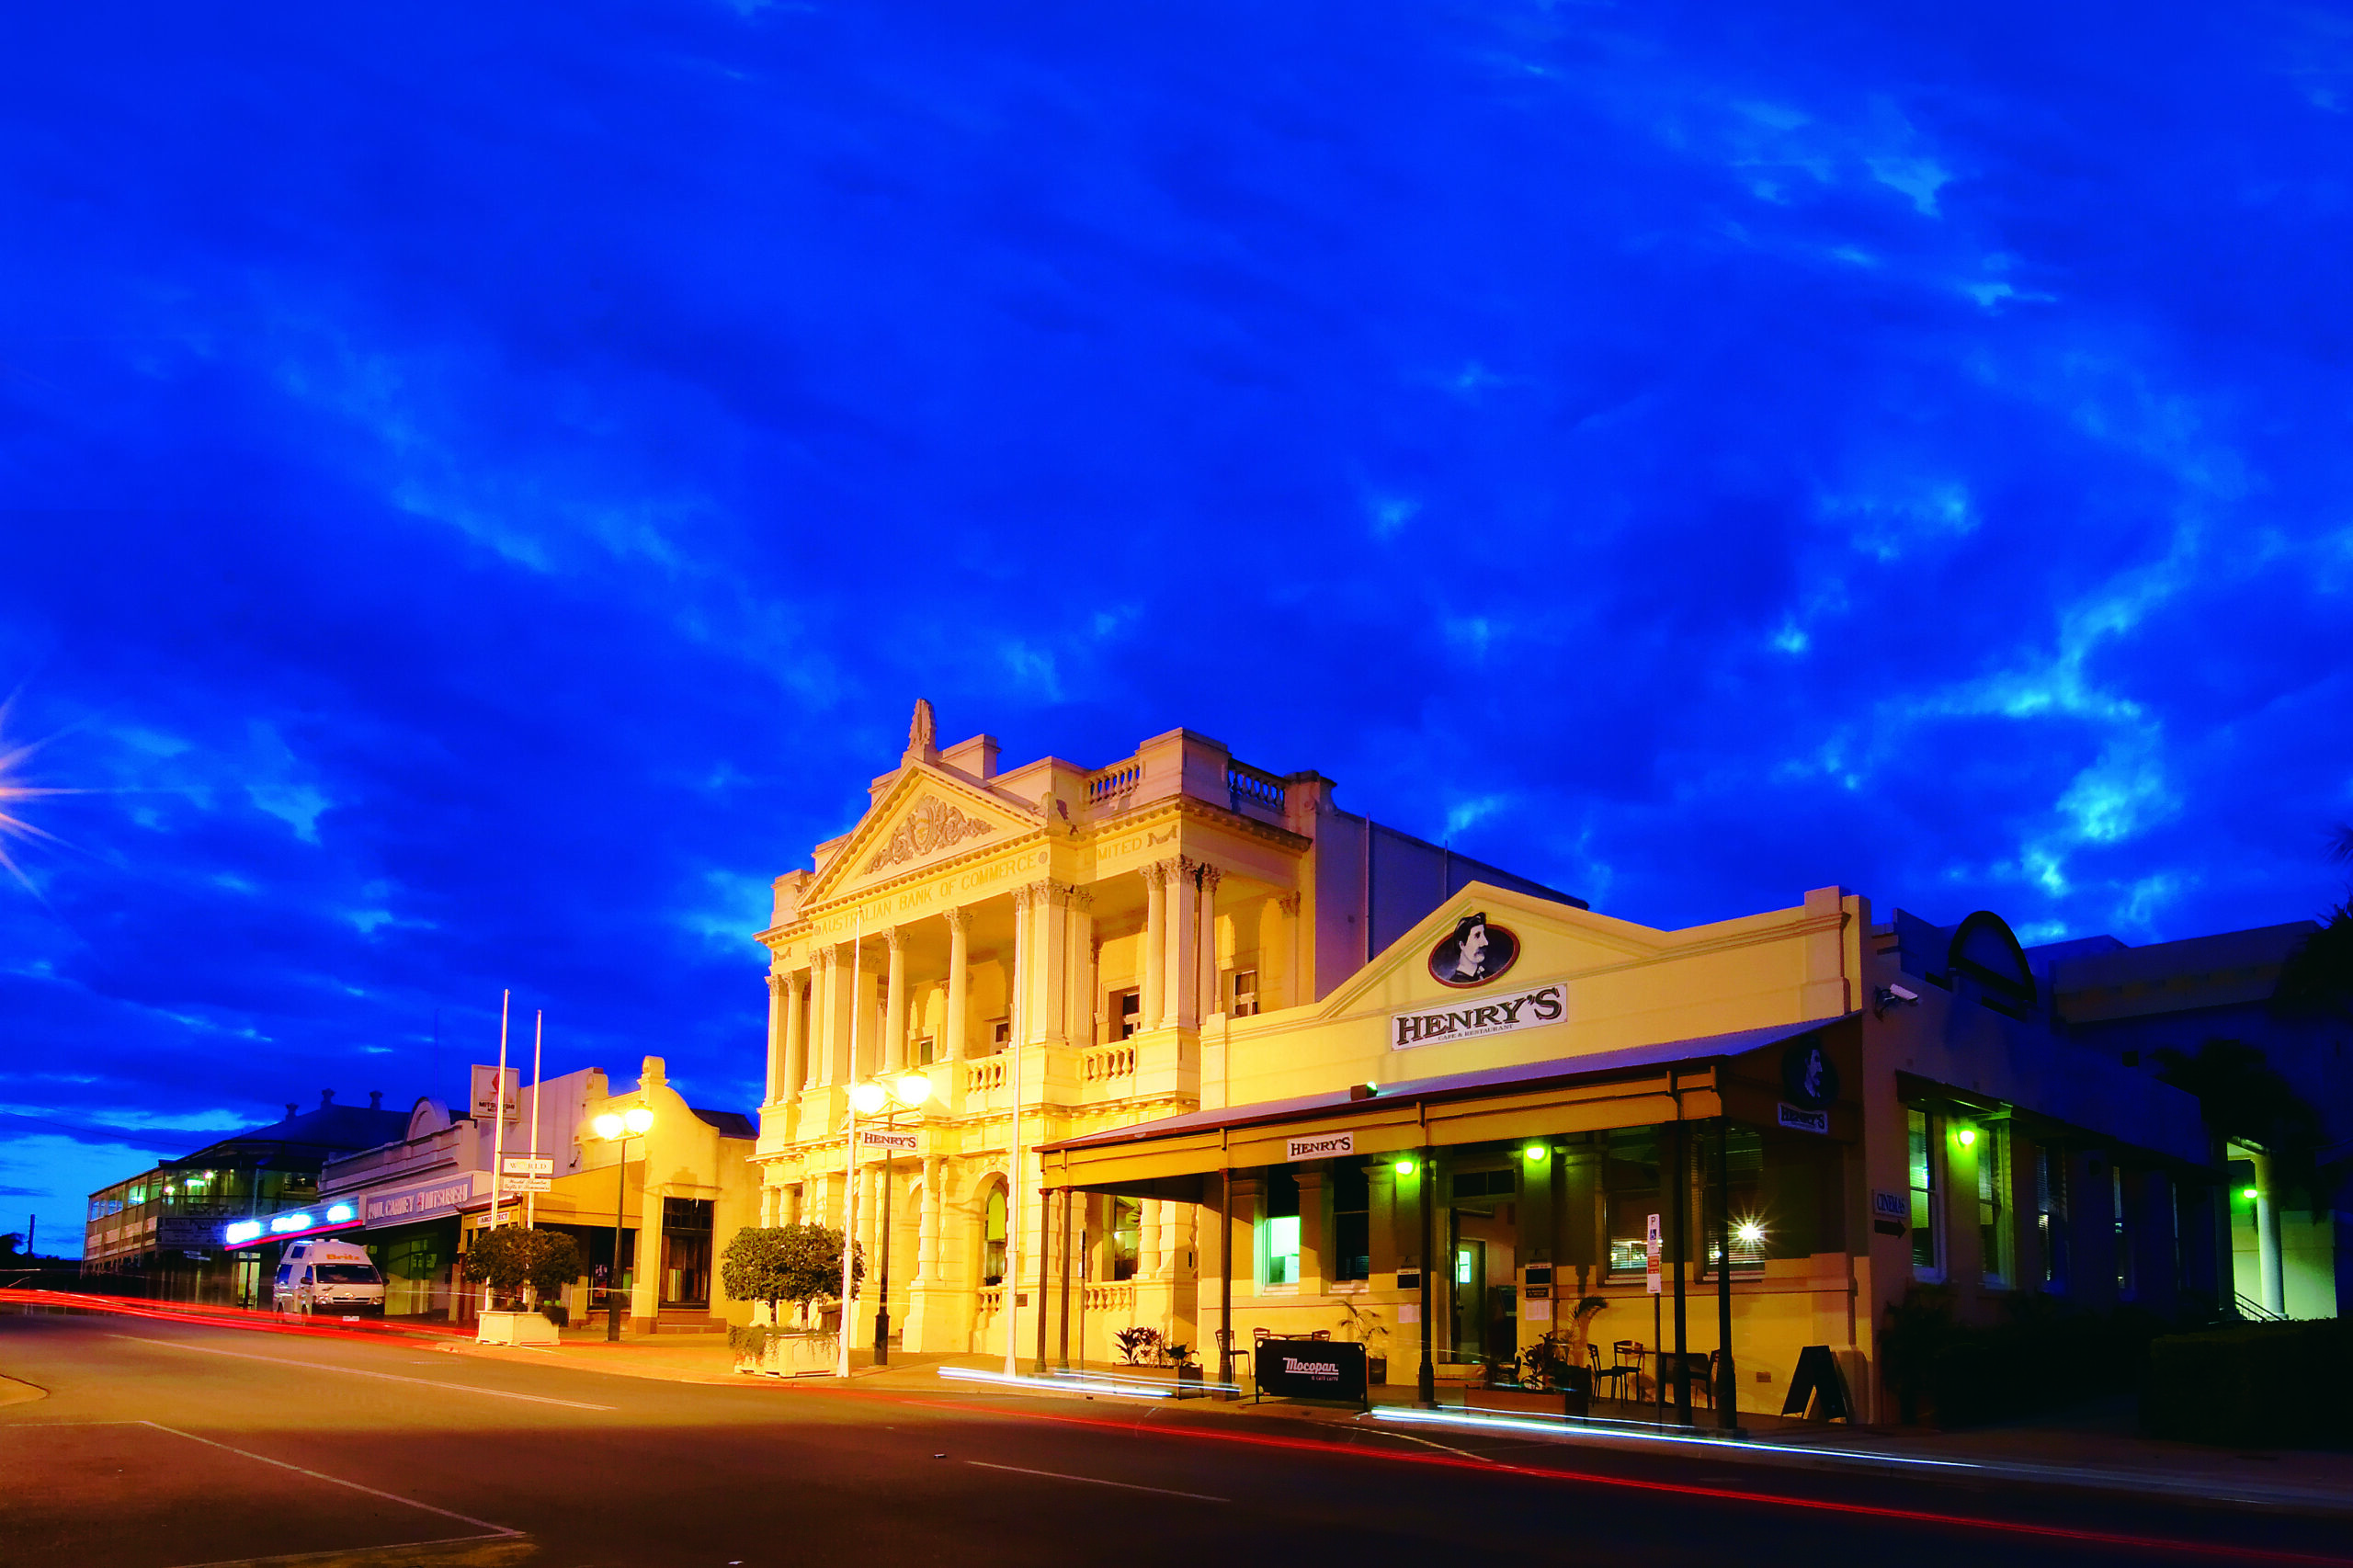 tours charters towers